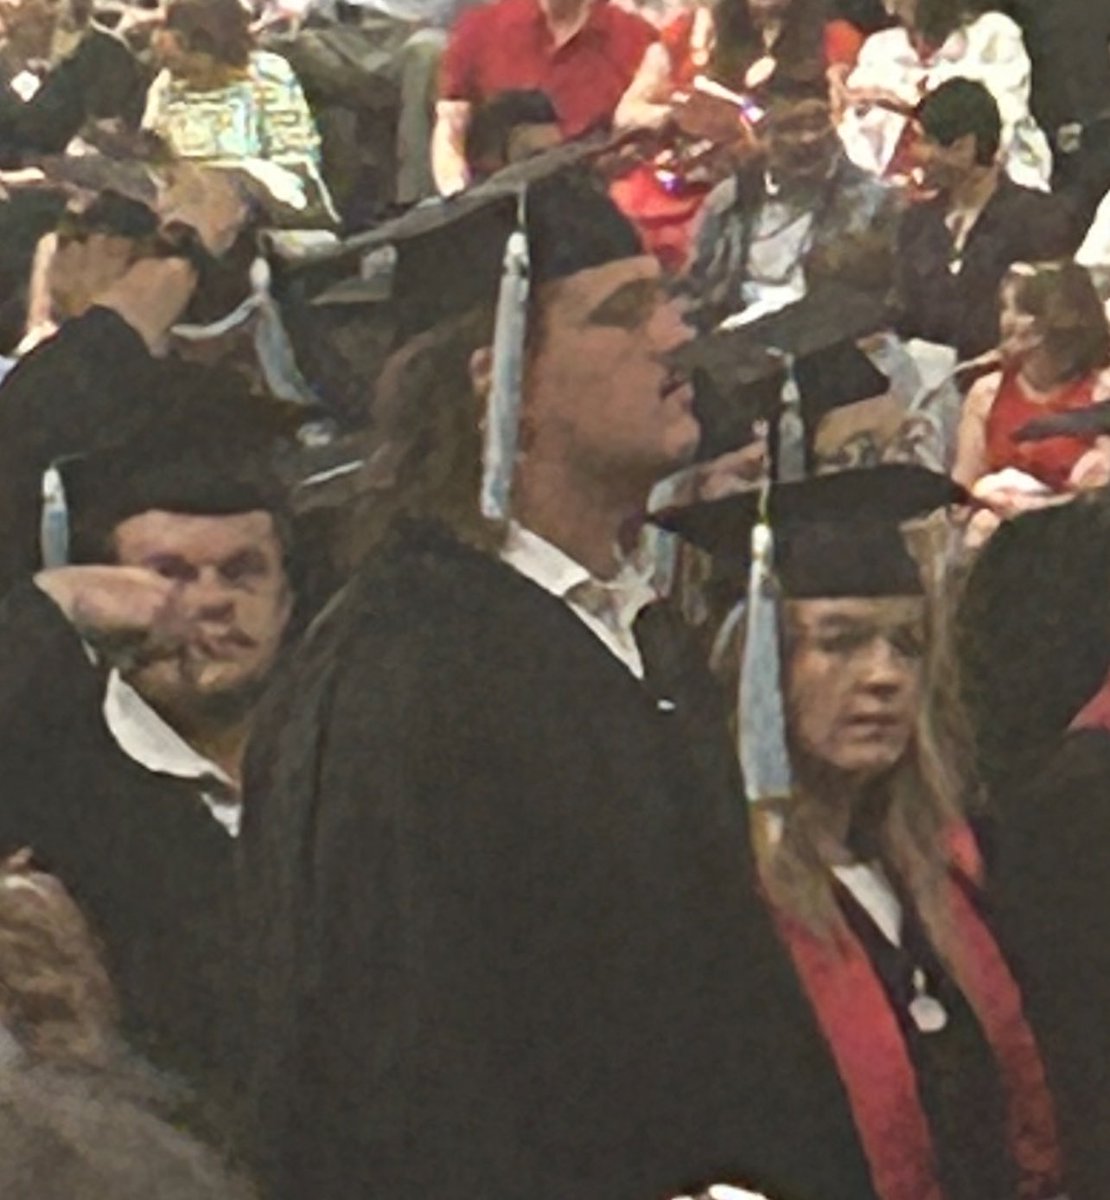 Here at UGA for my step son’s graduation, and also want to send a shout out to @tateratledge22 today!! Go Dawgs!!